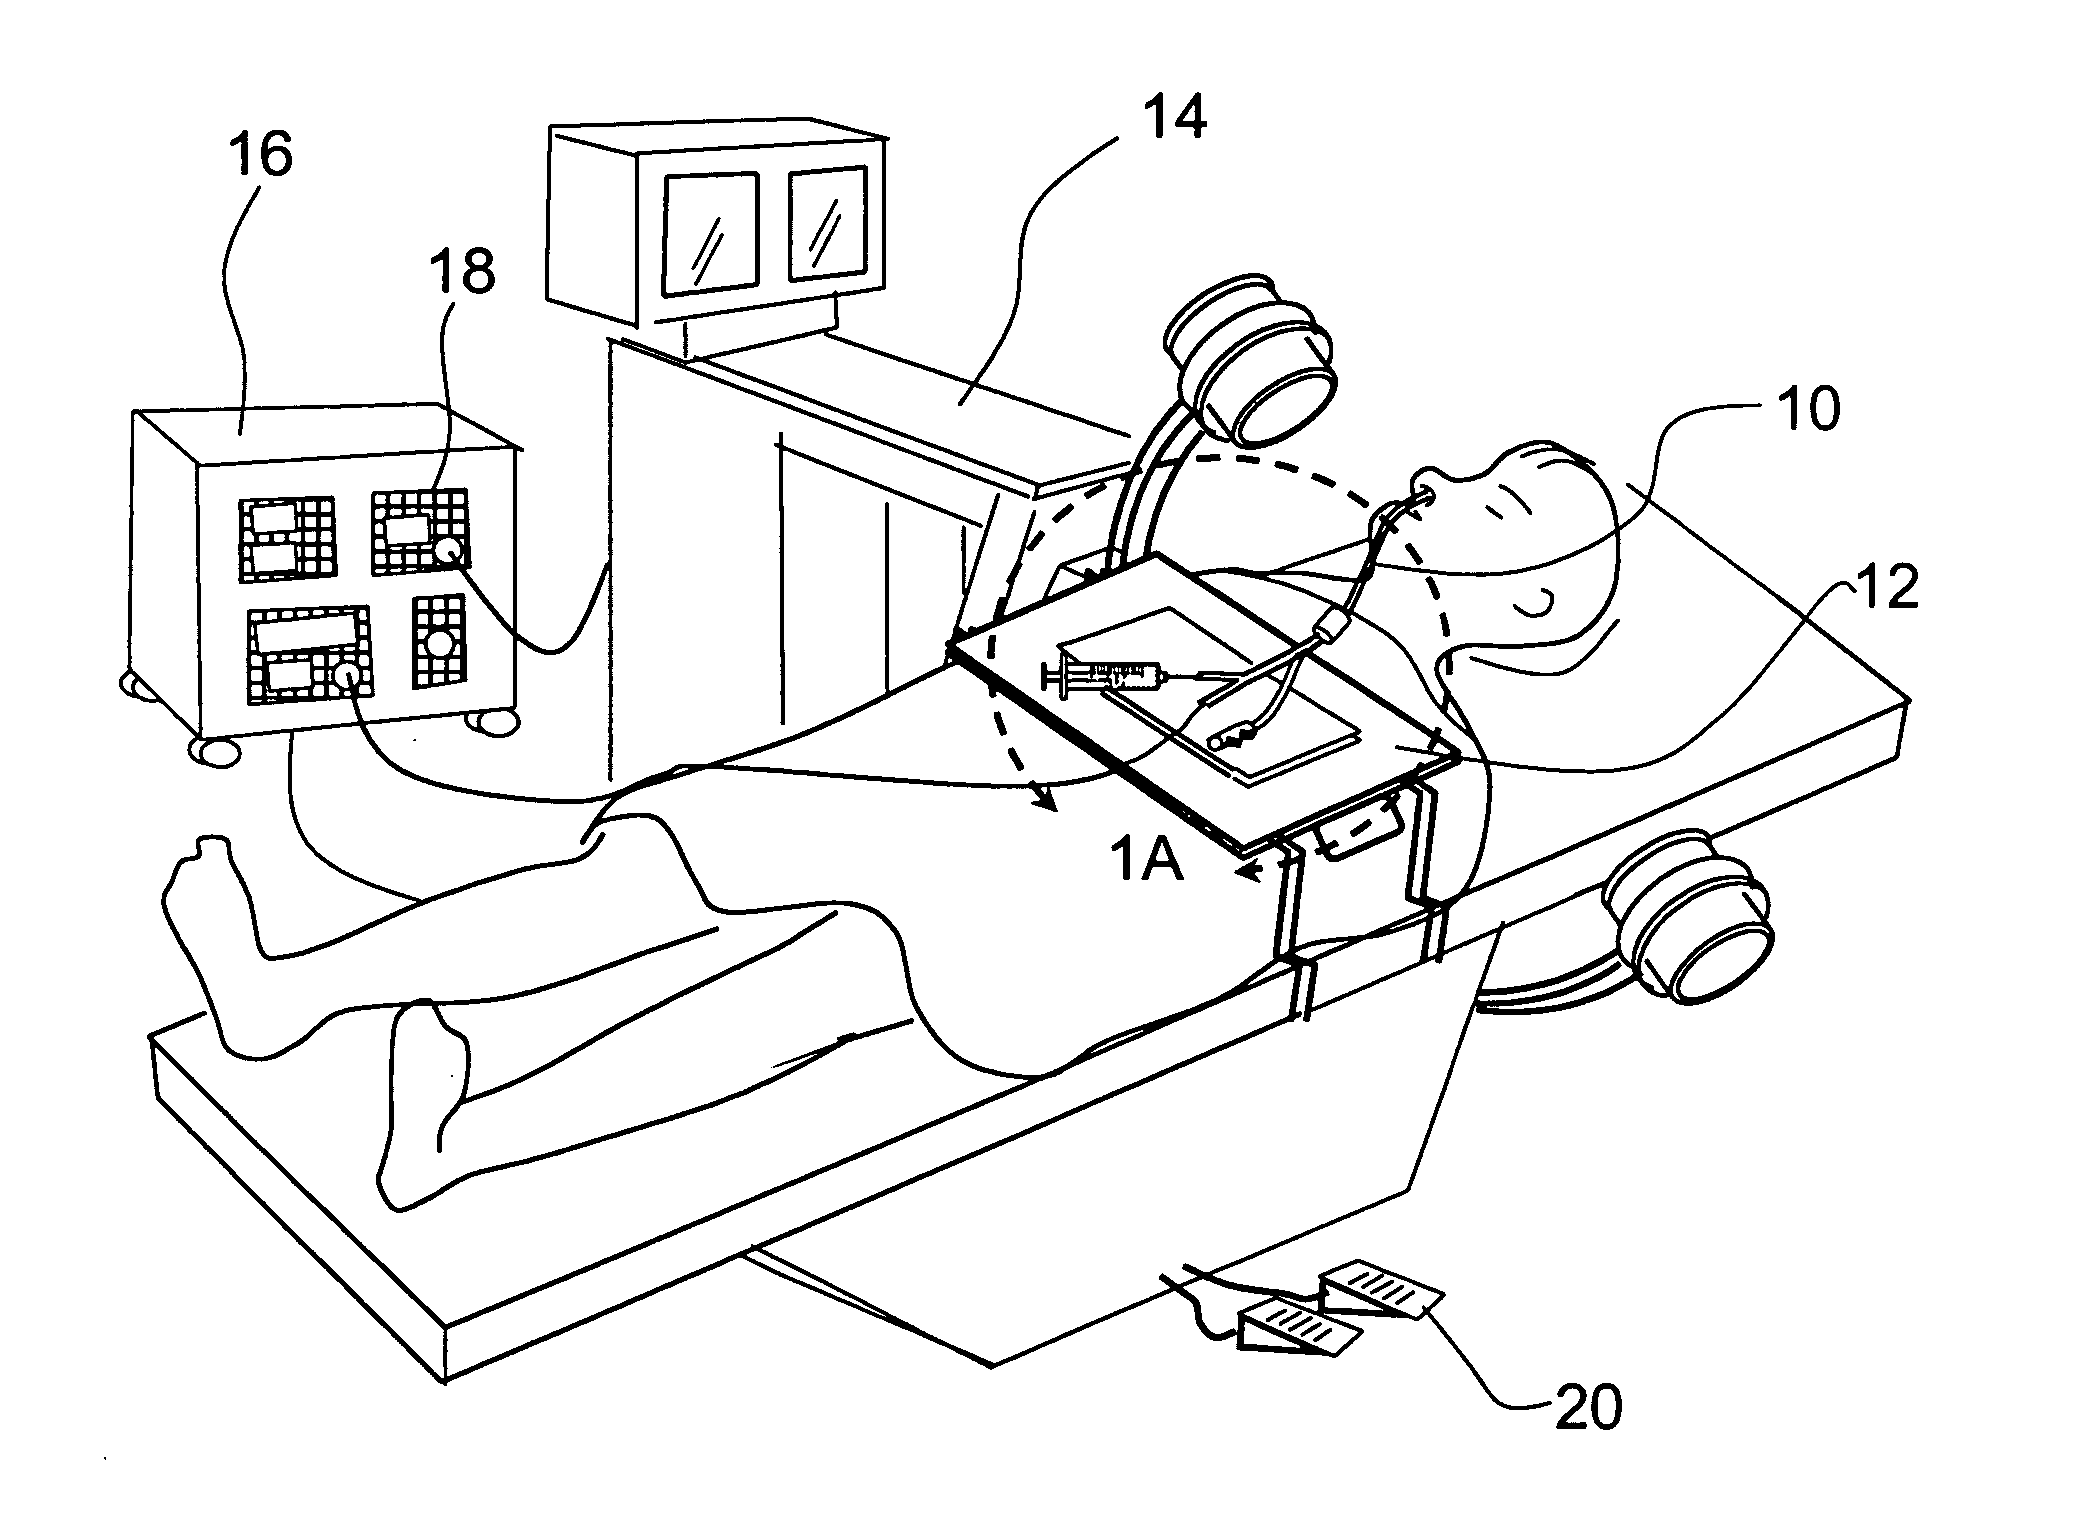 Devices, systems and methods for treating disorders of the ear, nose and throat